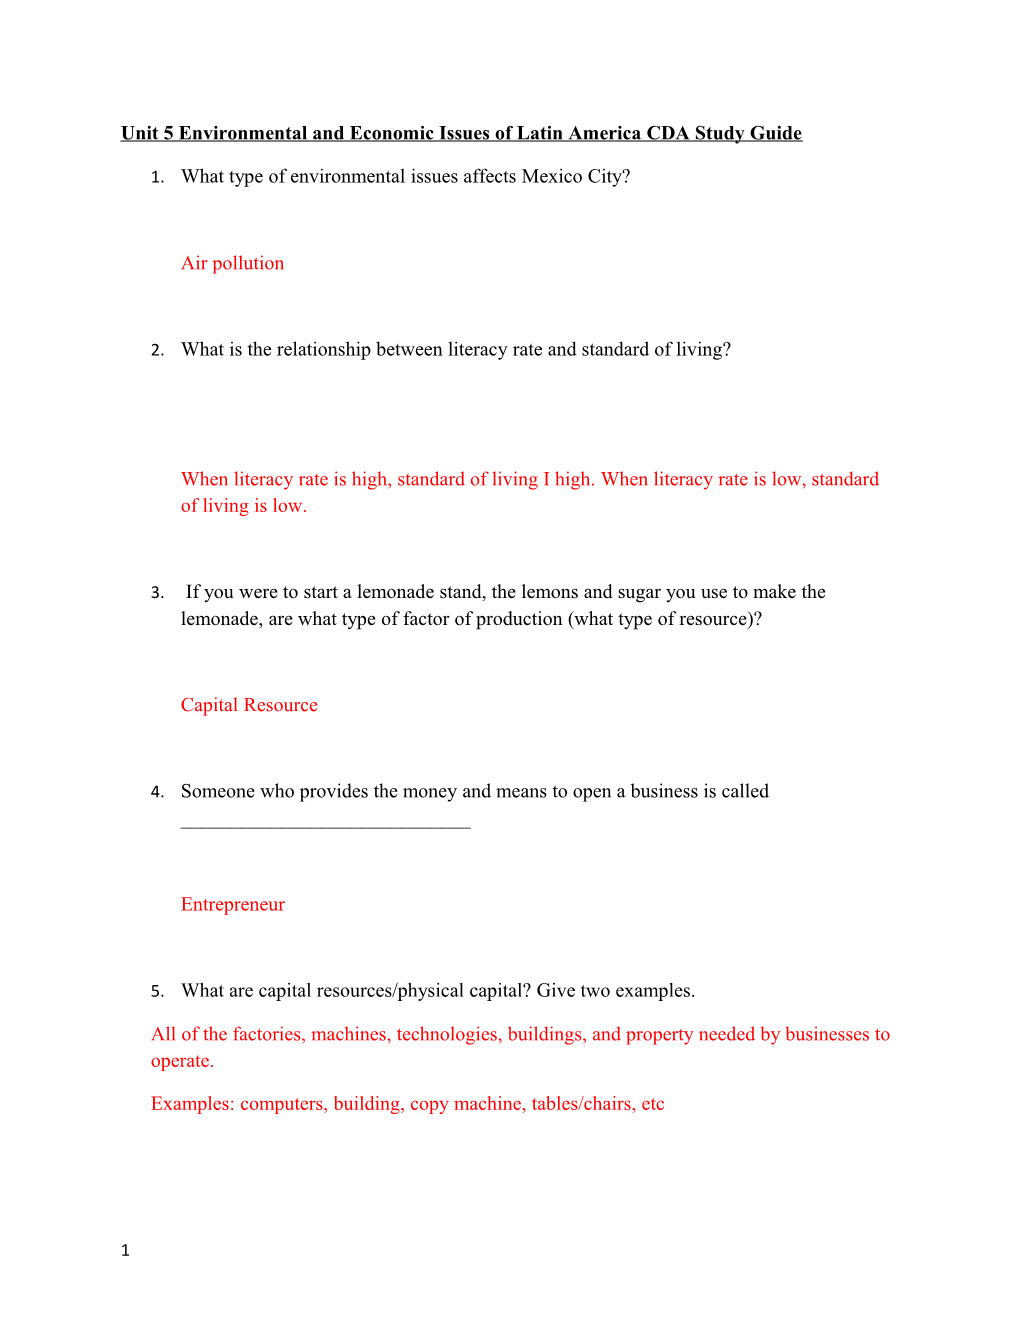 Unit 5 Environmental and Economic Issues of Latin America CDA Study Guide